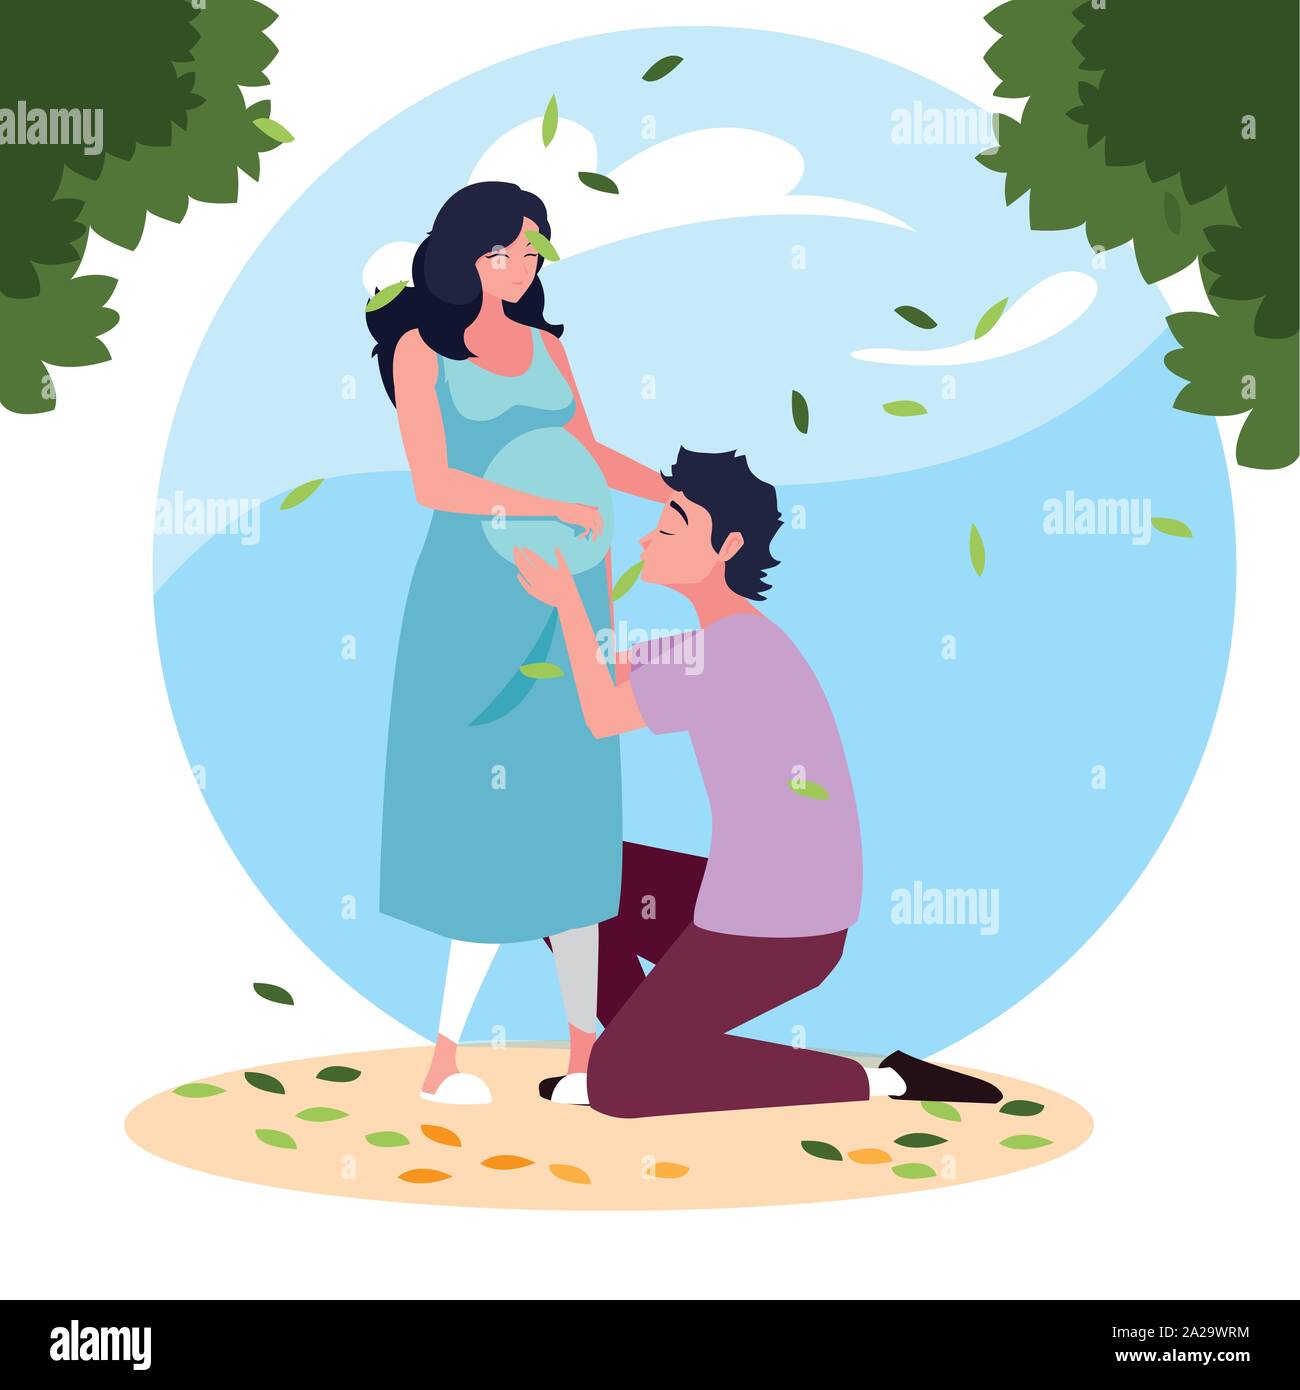 https://c8.alamy.com/comp/2A29WRM/pregnant-woman-and-man-design-couple-family-love-pregnancy-maternity-and-expecting-theme-vector-illustration-2A29WRM.jpg